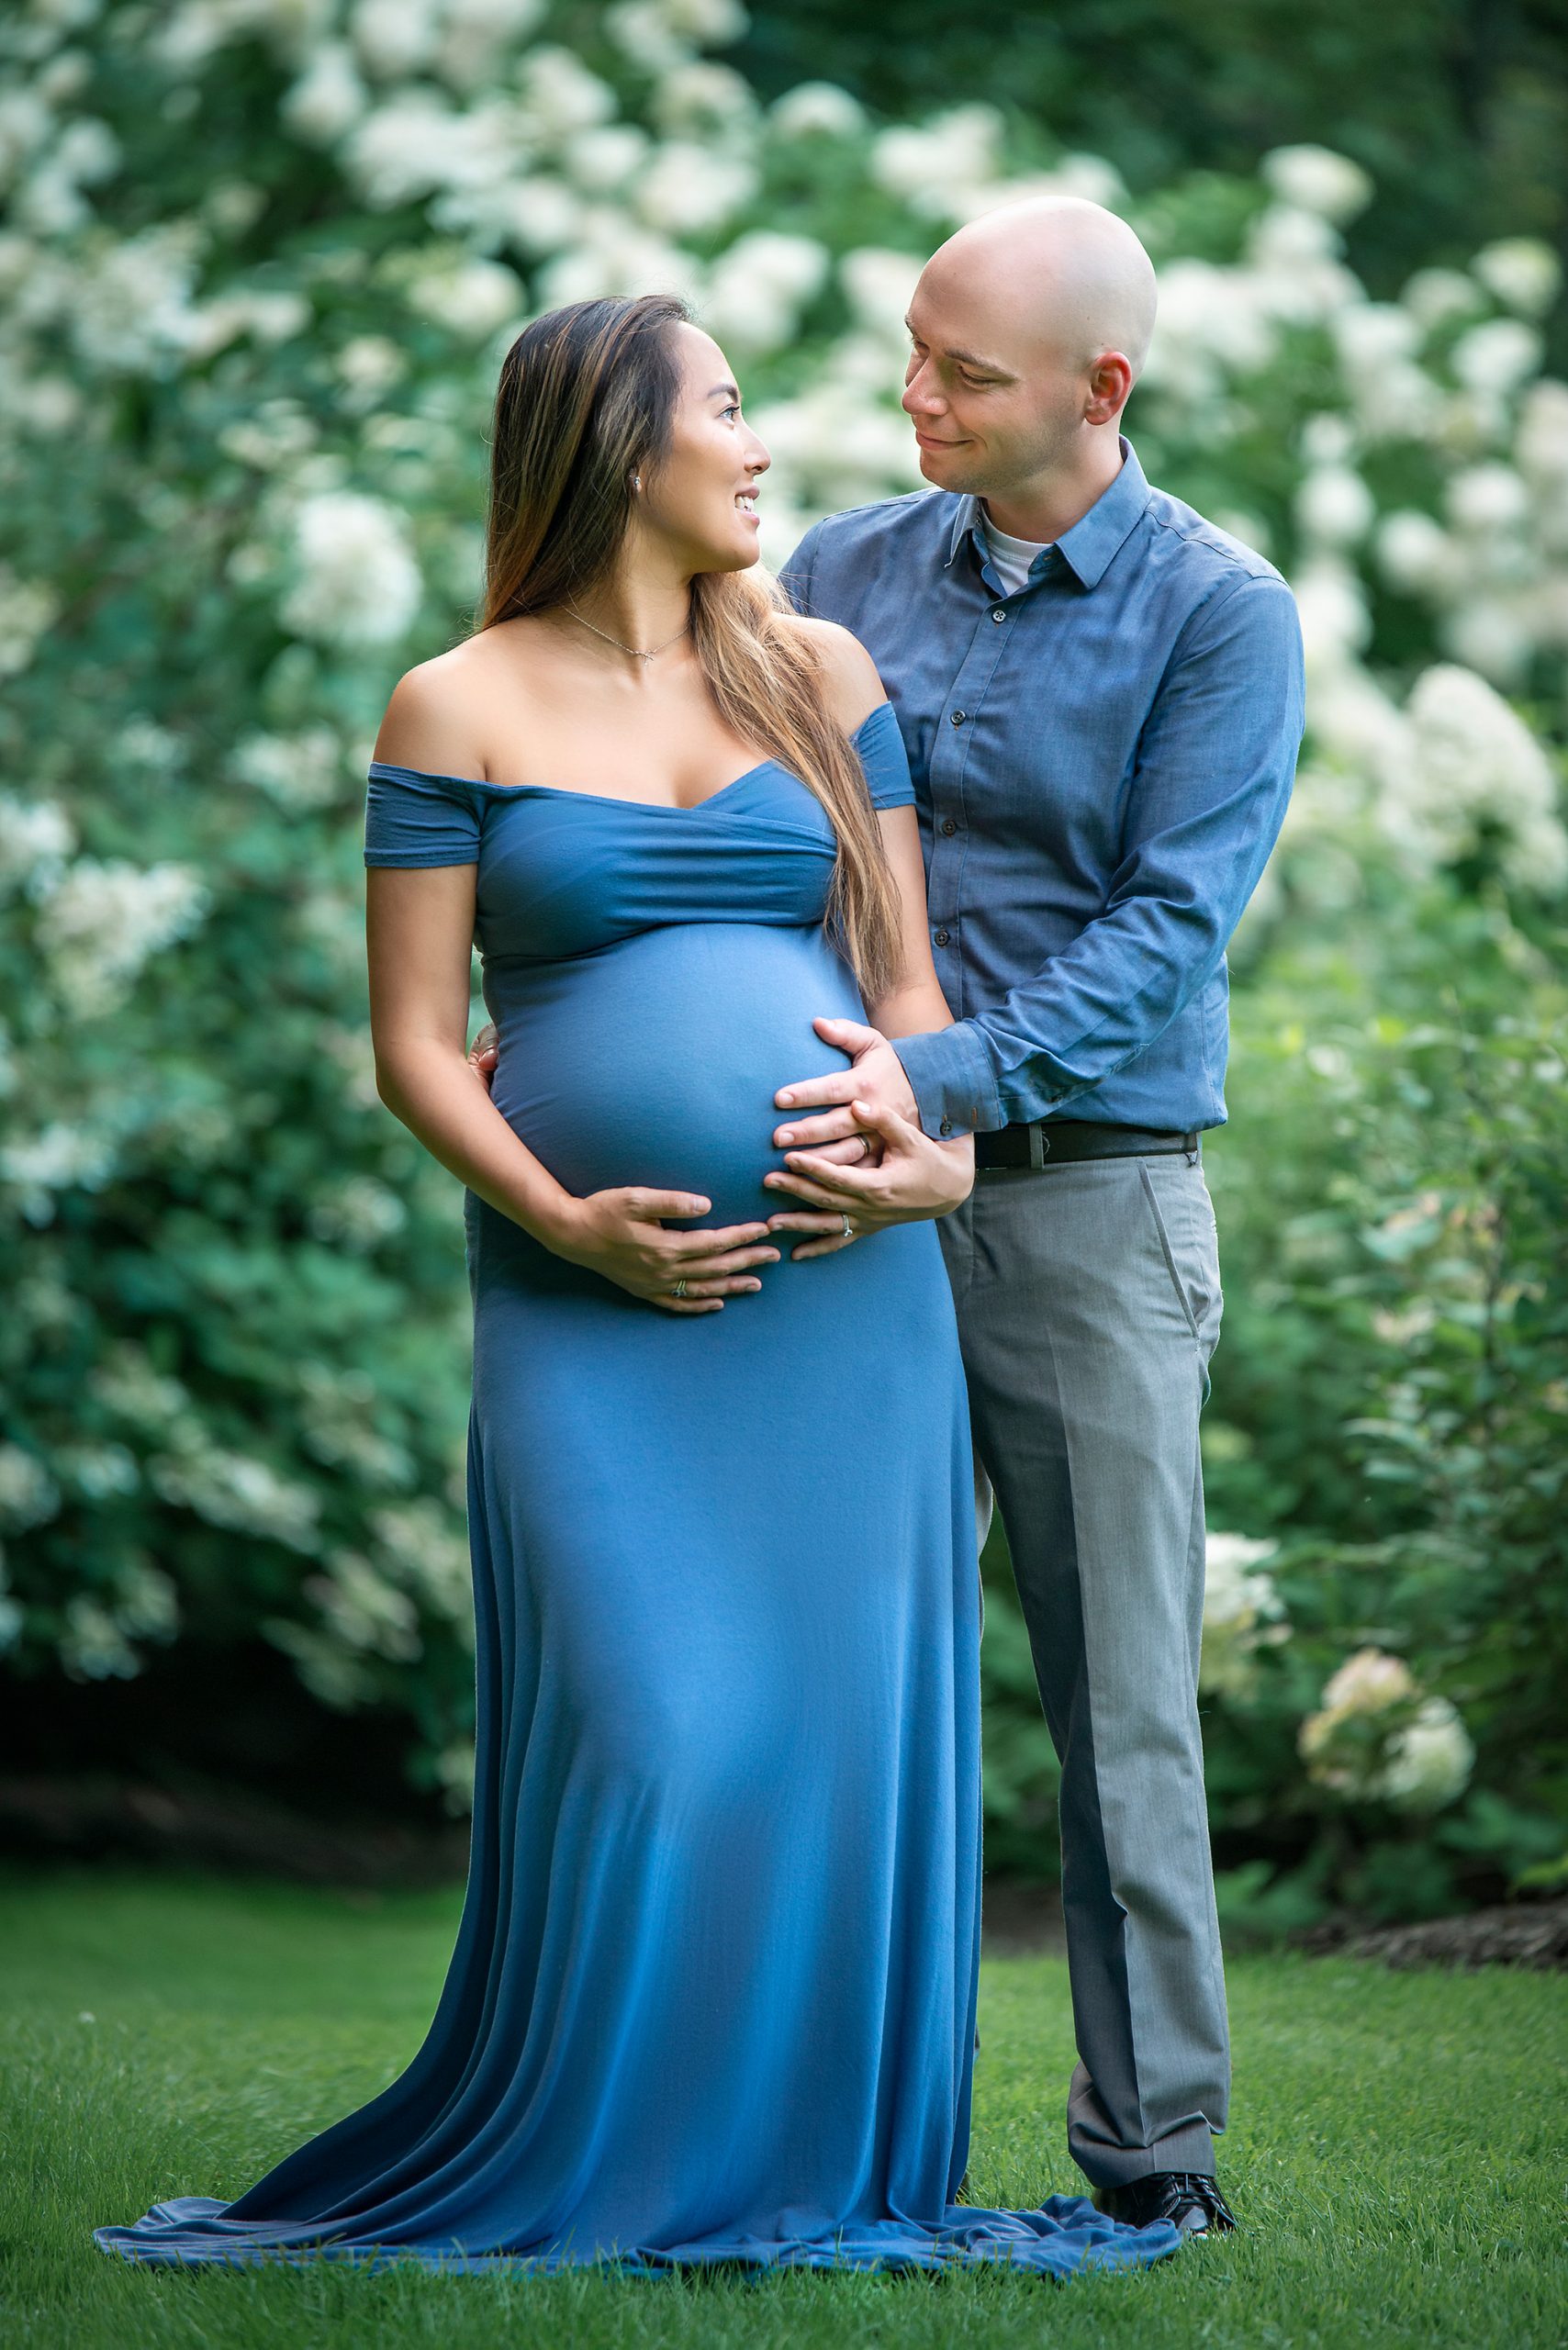 pregnant woman wearing a blue dress posing with husband in front of a white flower bush